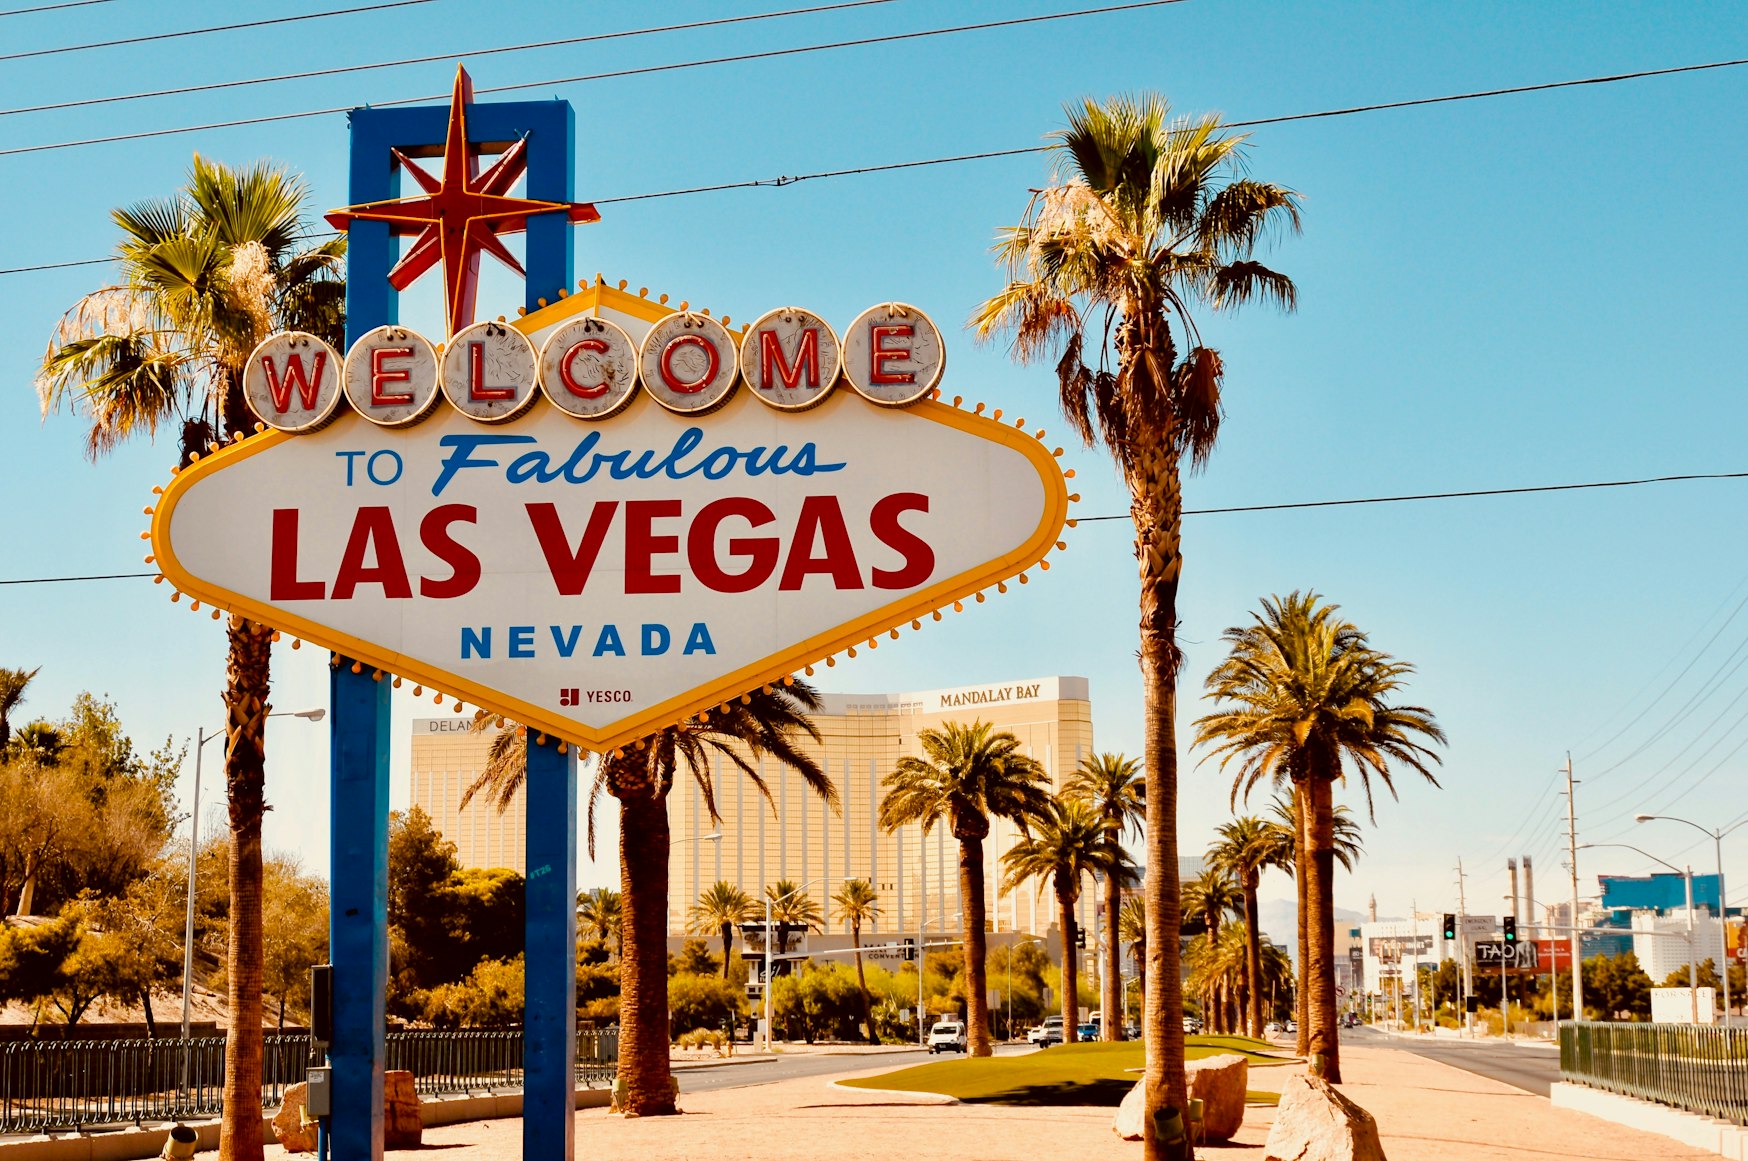 5 Things to See Off the Strip in Las Vegas